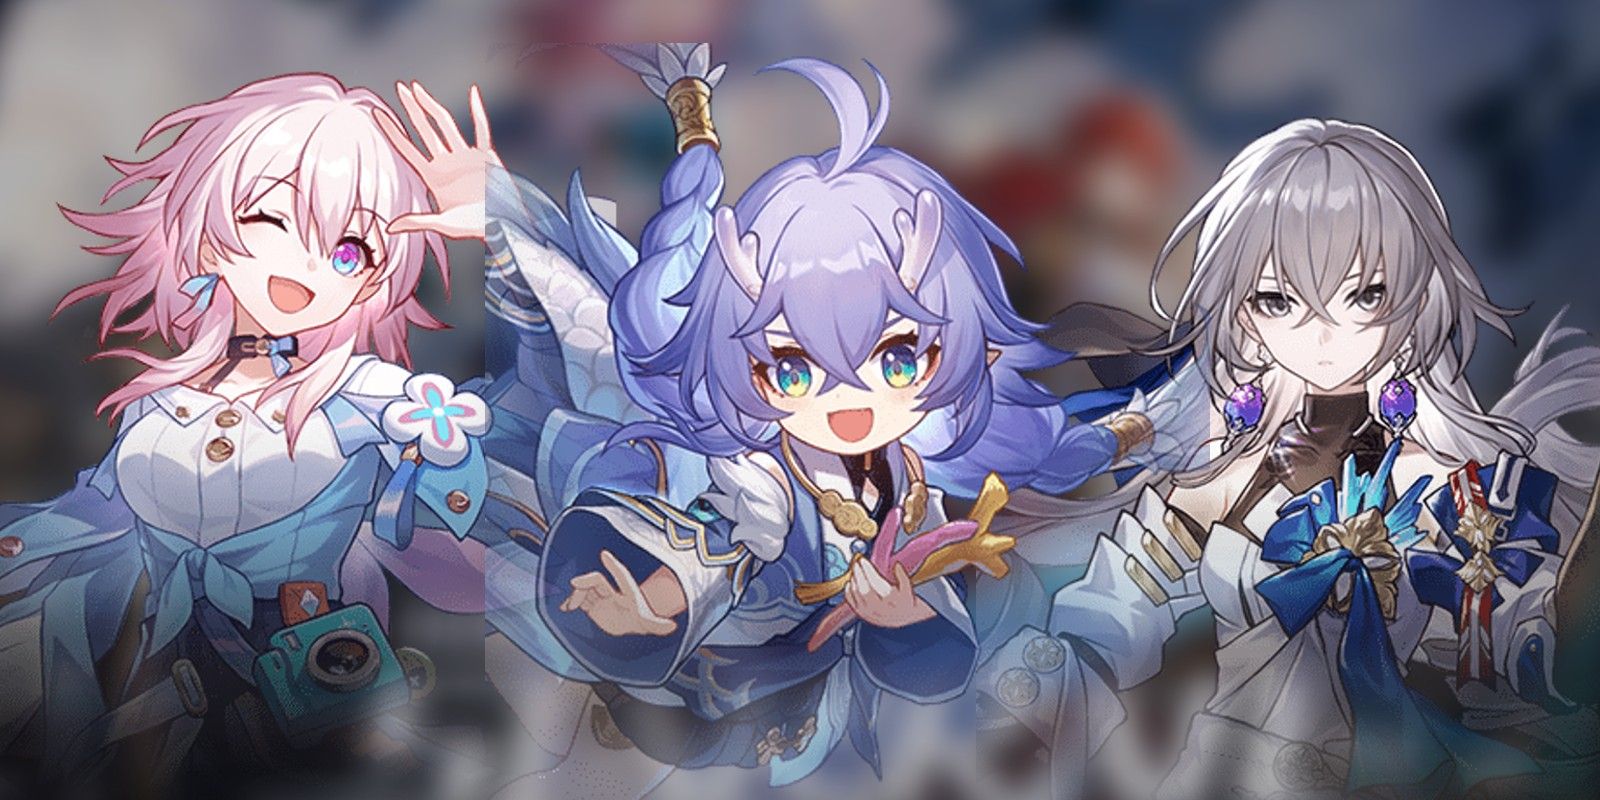 March7th Bailu and Bronya are three different characters in Honkai Star Rail that make great supports